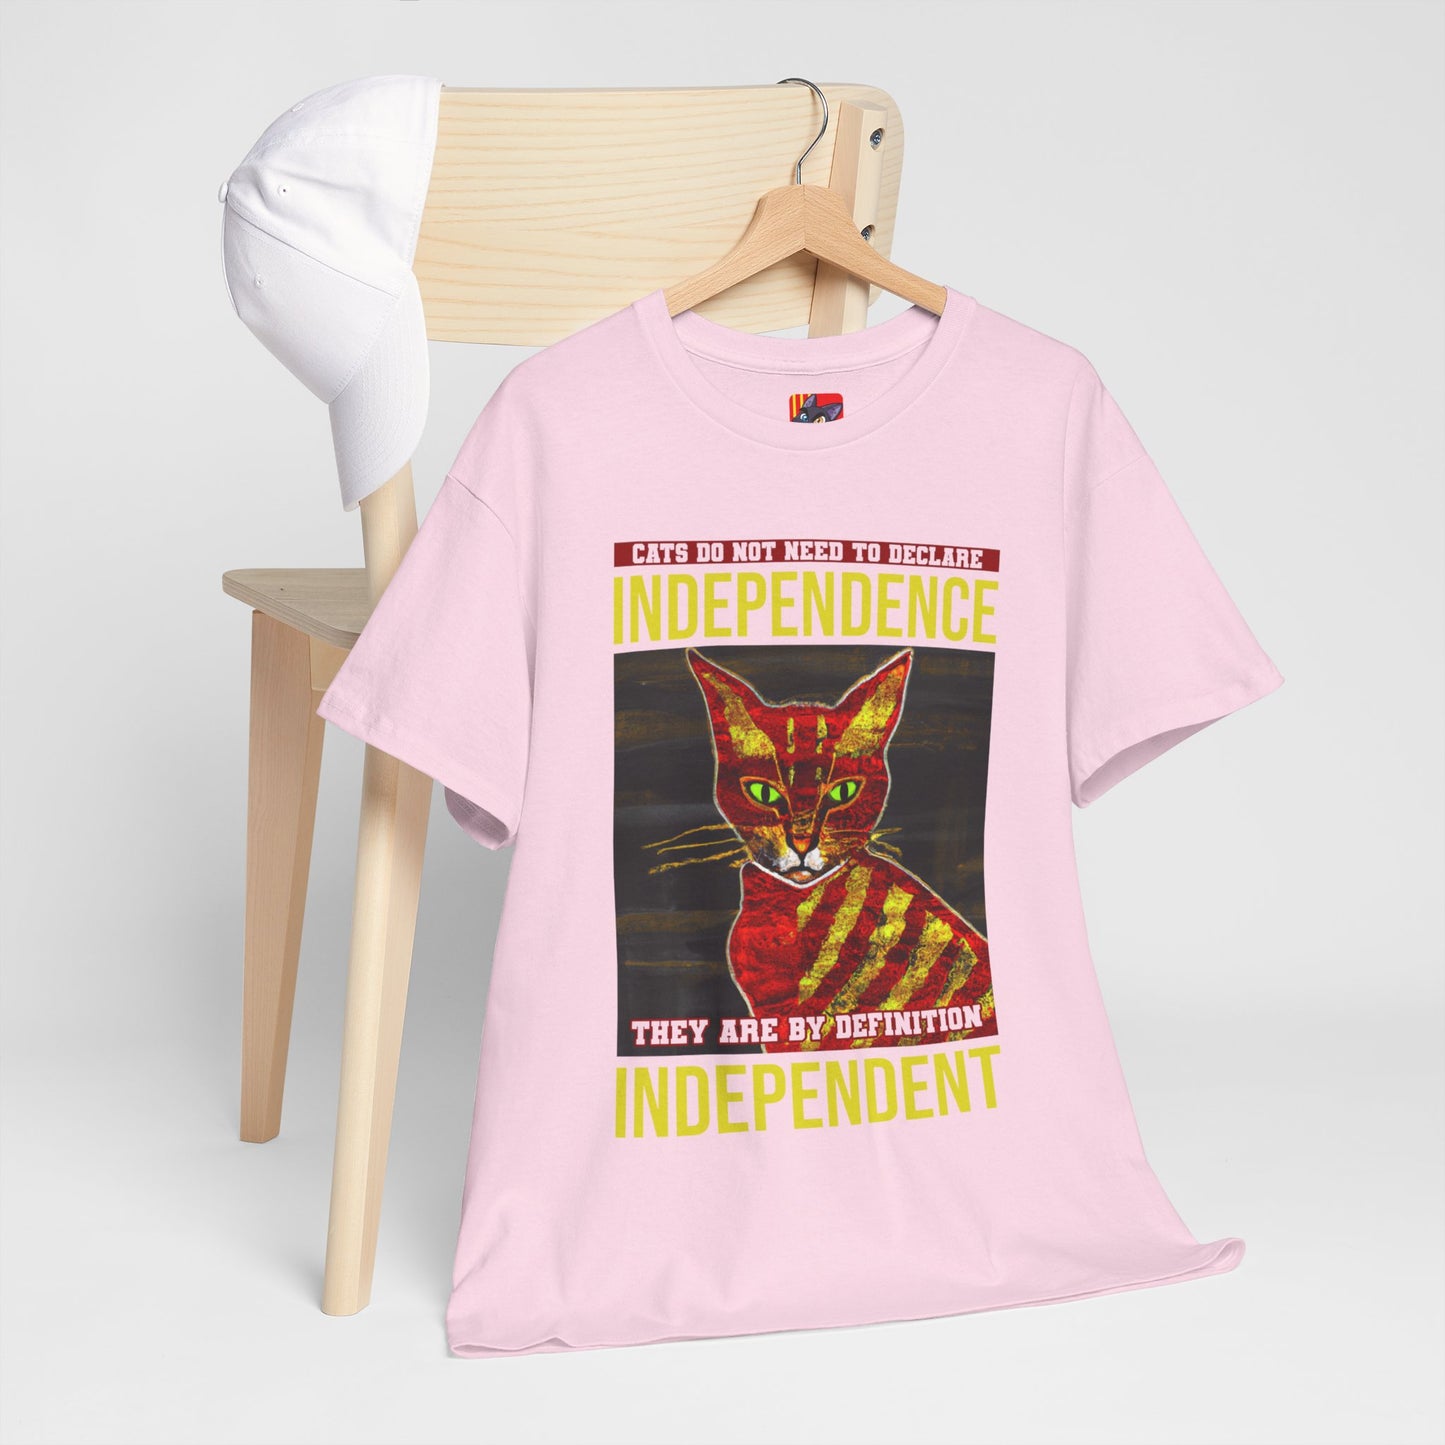 The Free Thinker T-Shirt: Cats do not need to declare independence